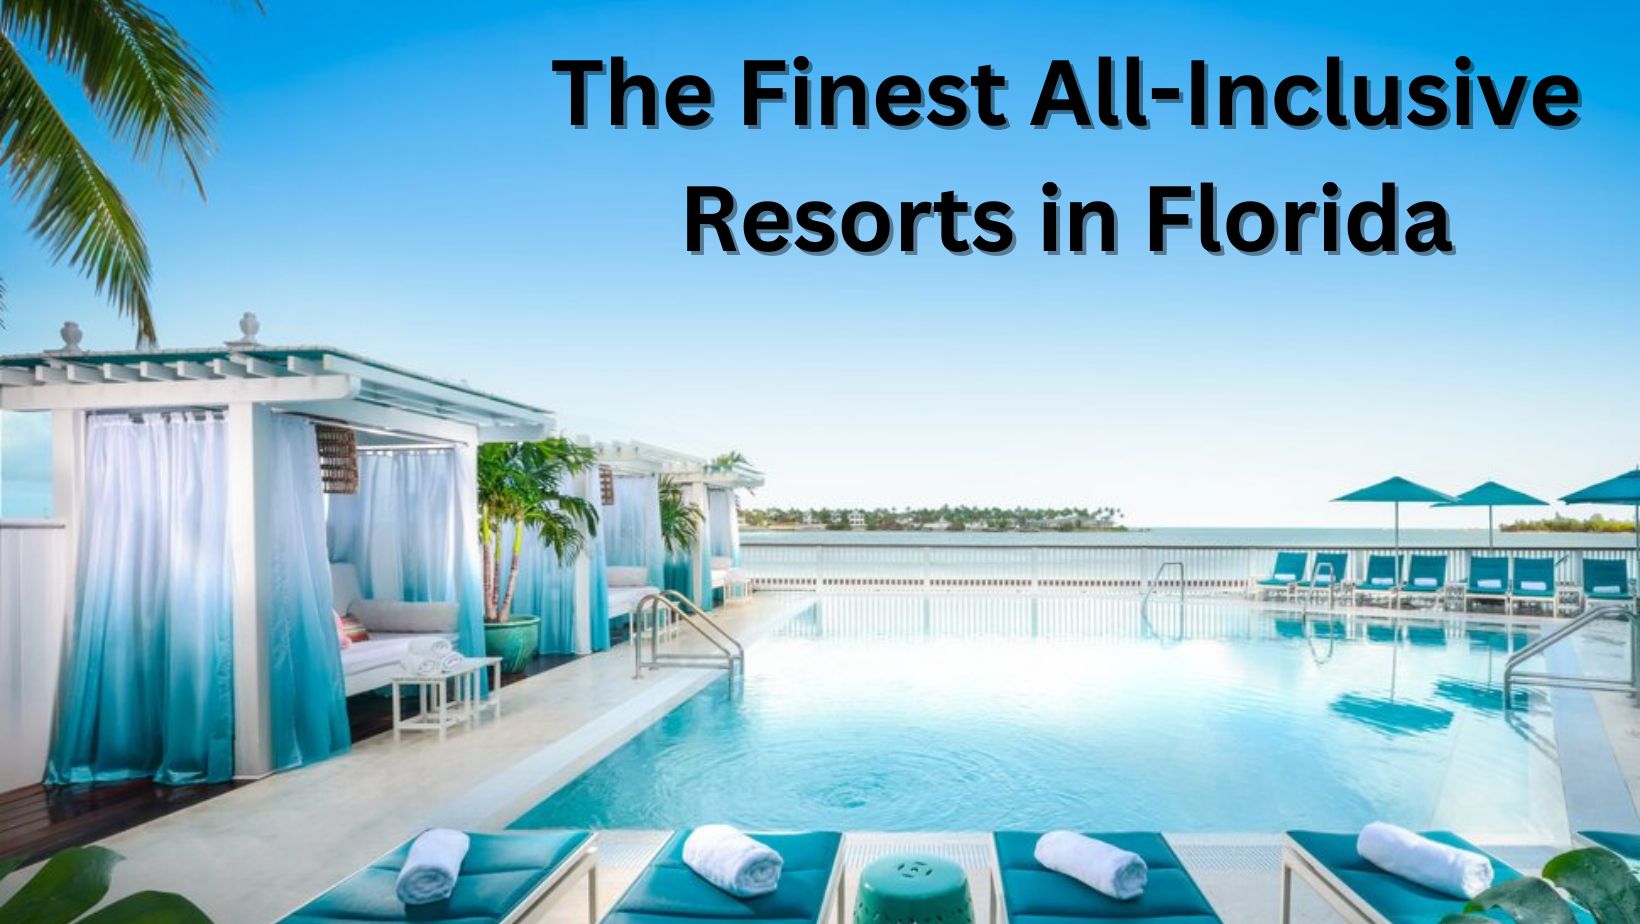 he Finest All-Inclusive Resorts in Florida